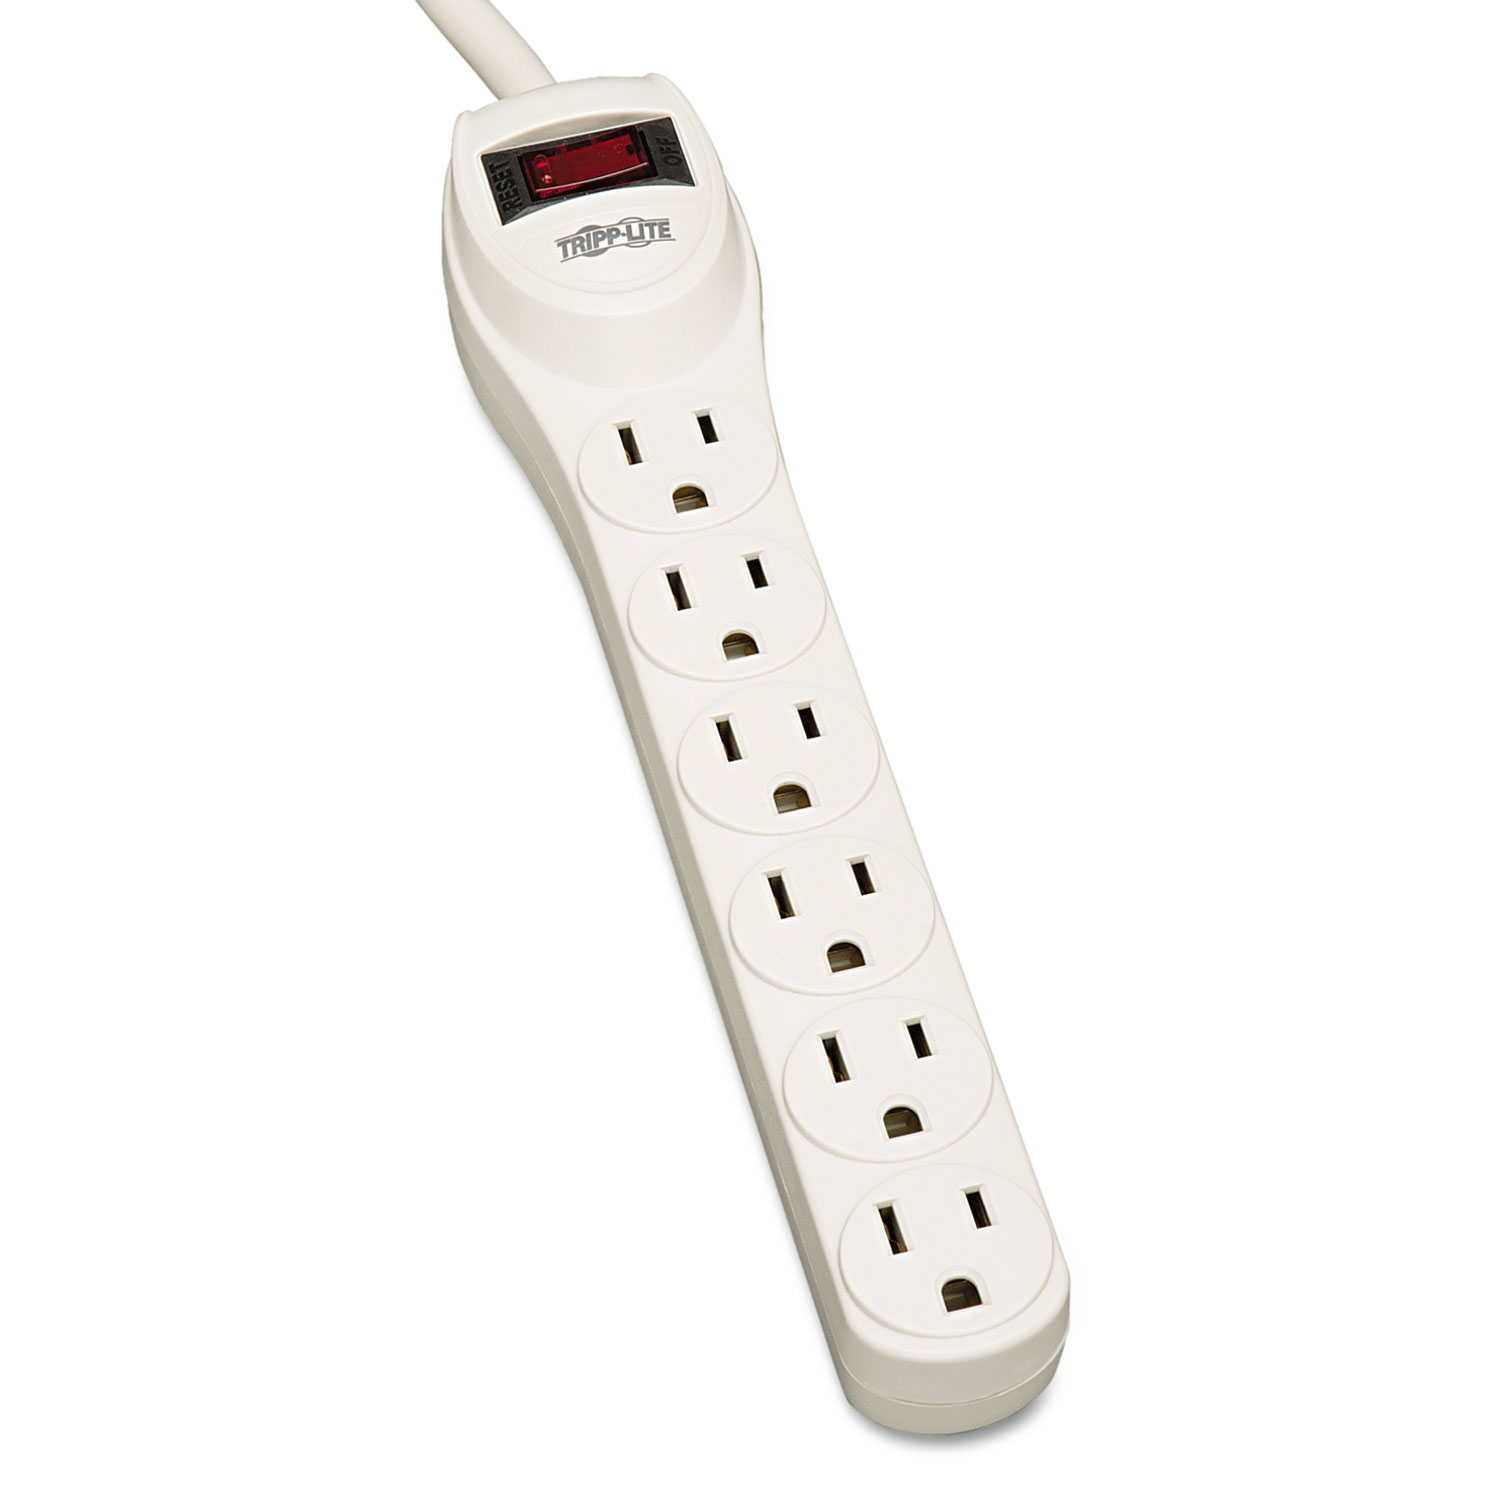 Protect It! Home Computer Surge Protector, 6 Outlets, 2 ft. Cord, 180 Joules